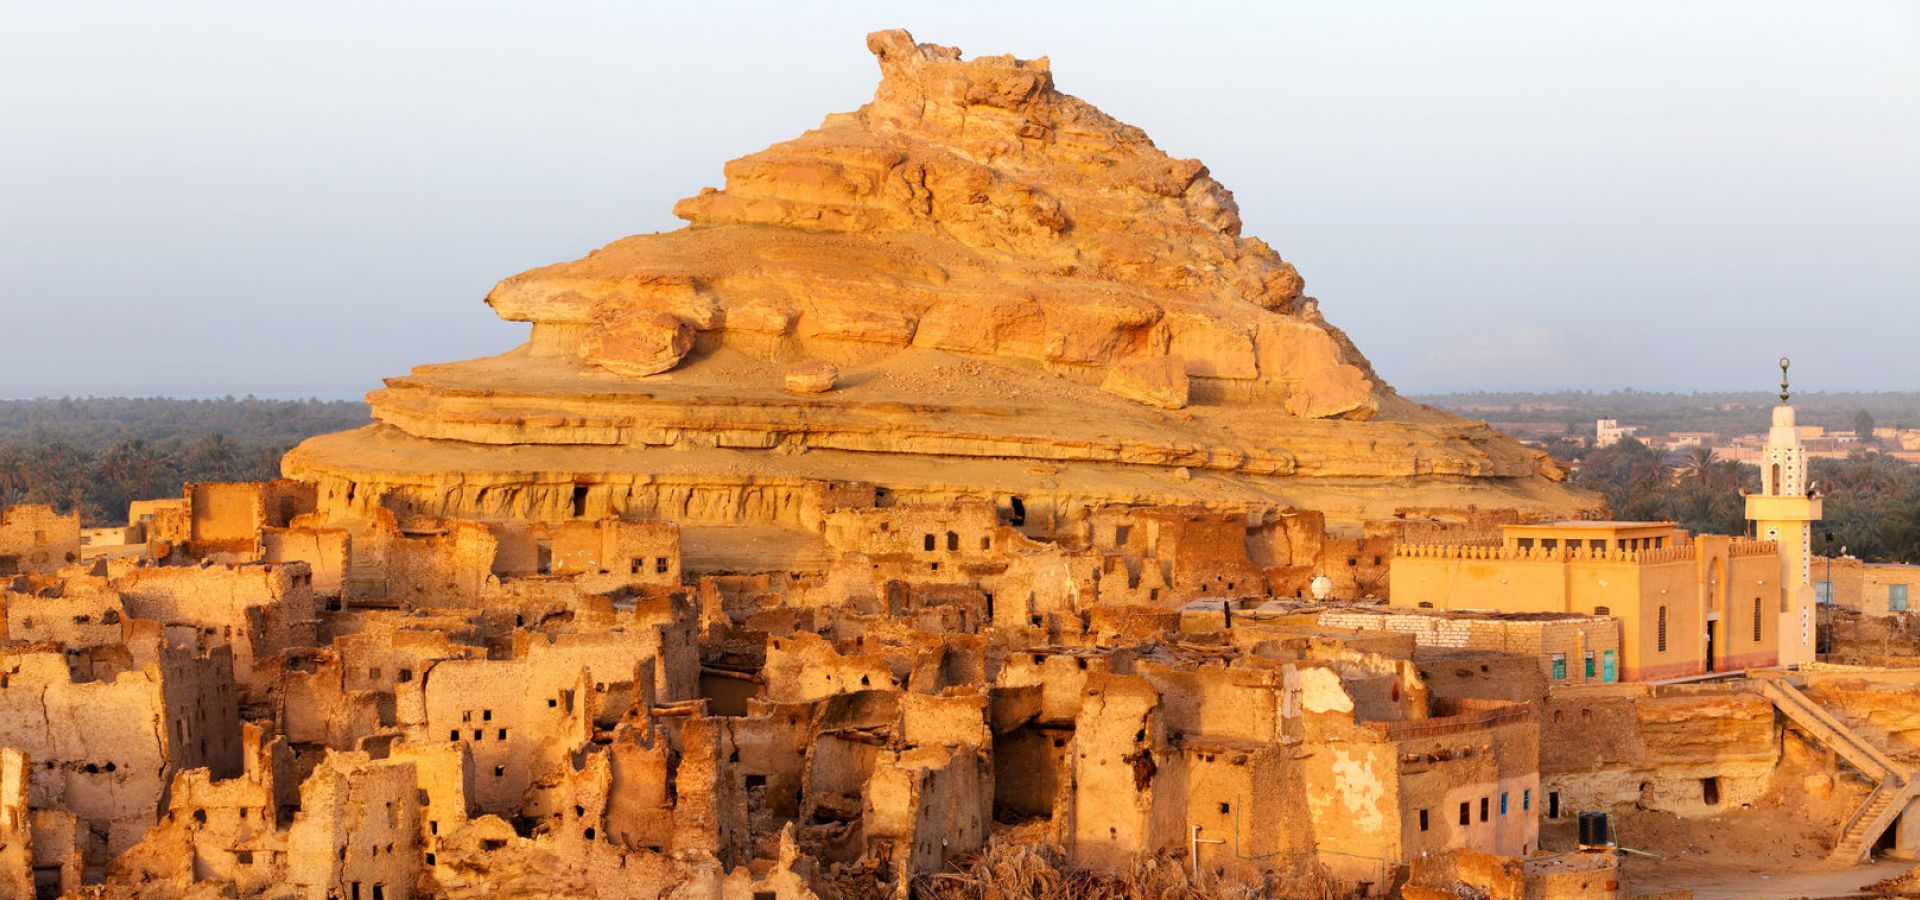 Siwa Oasis and Al Alamein 4 days 3 nights tour from Cairo